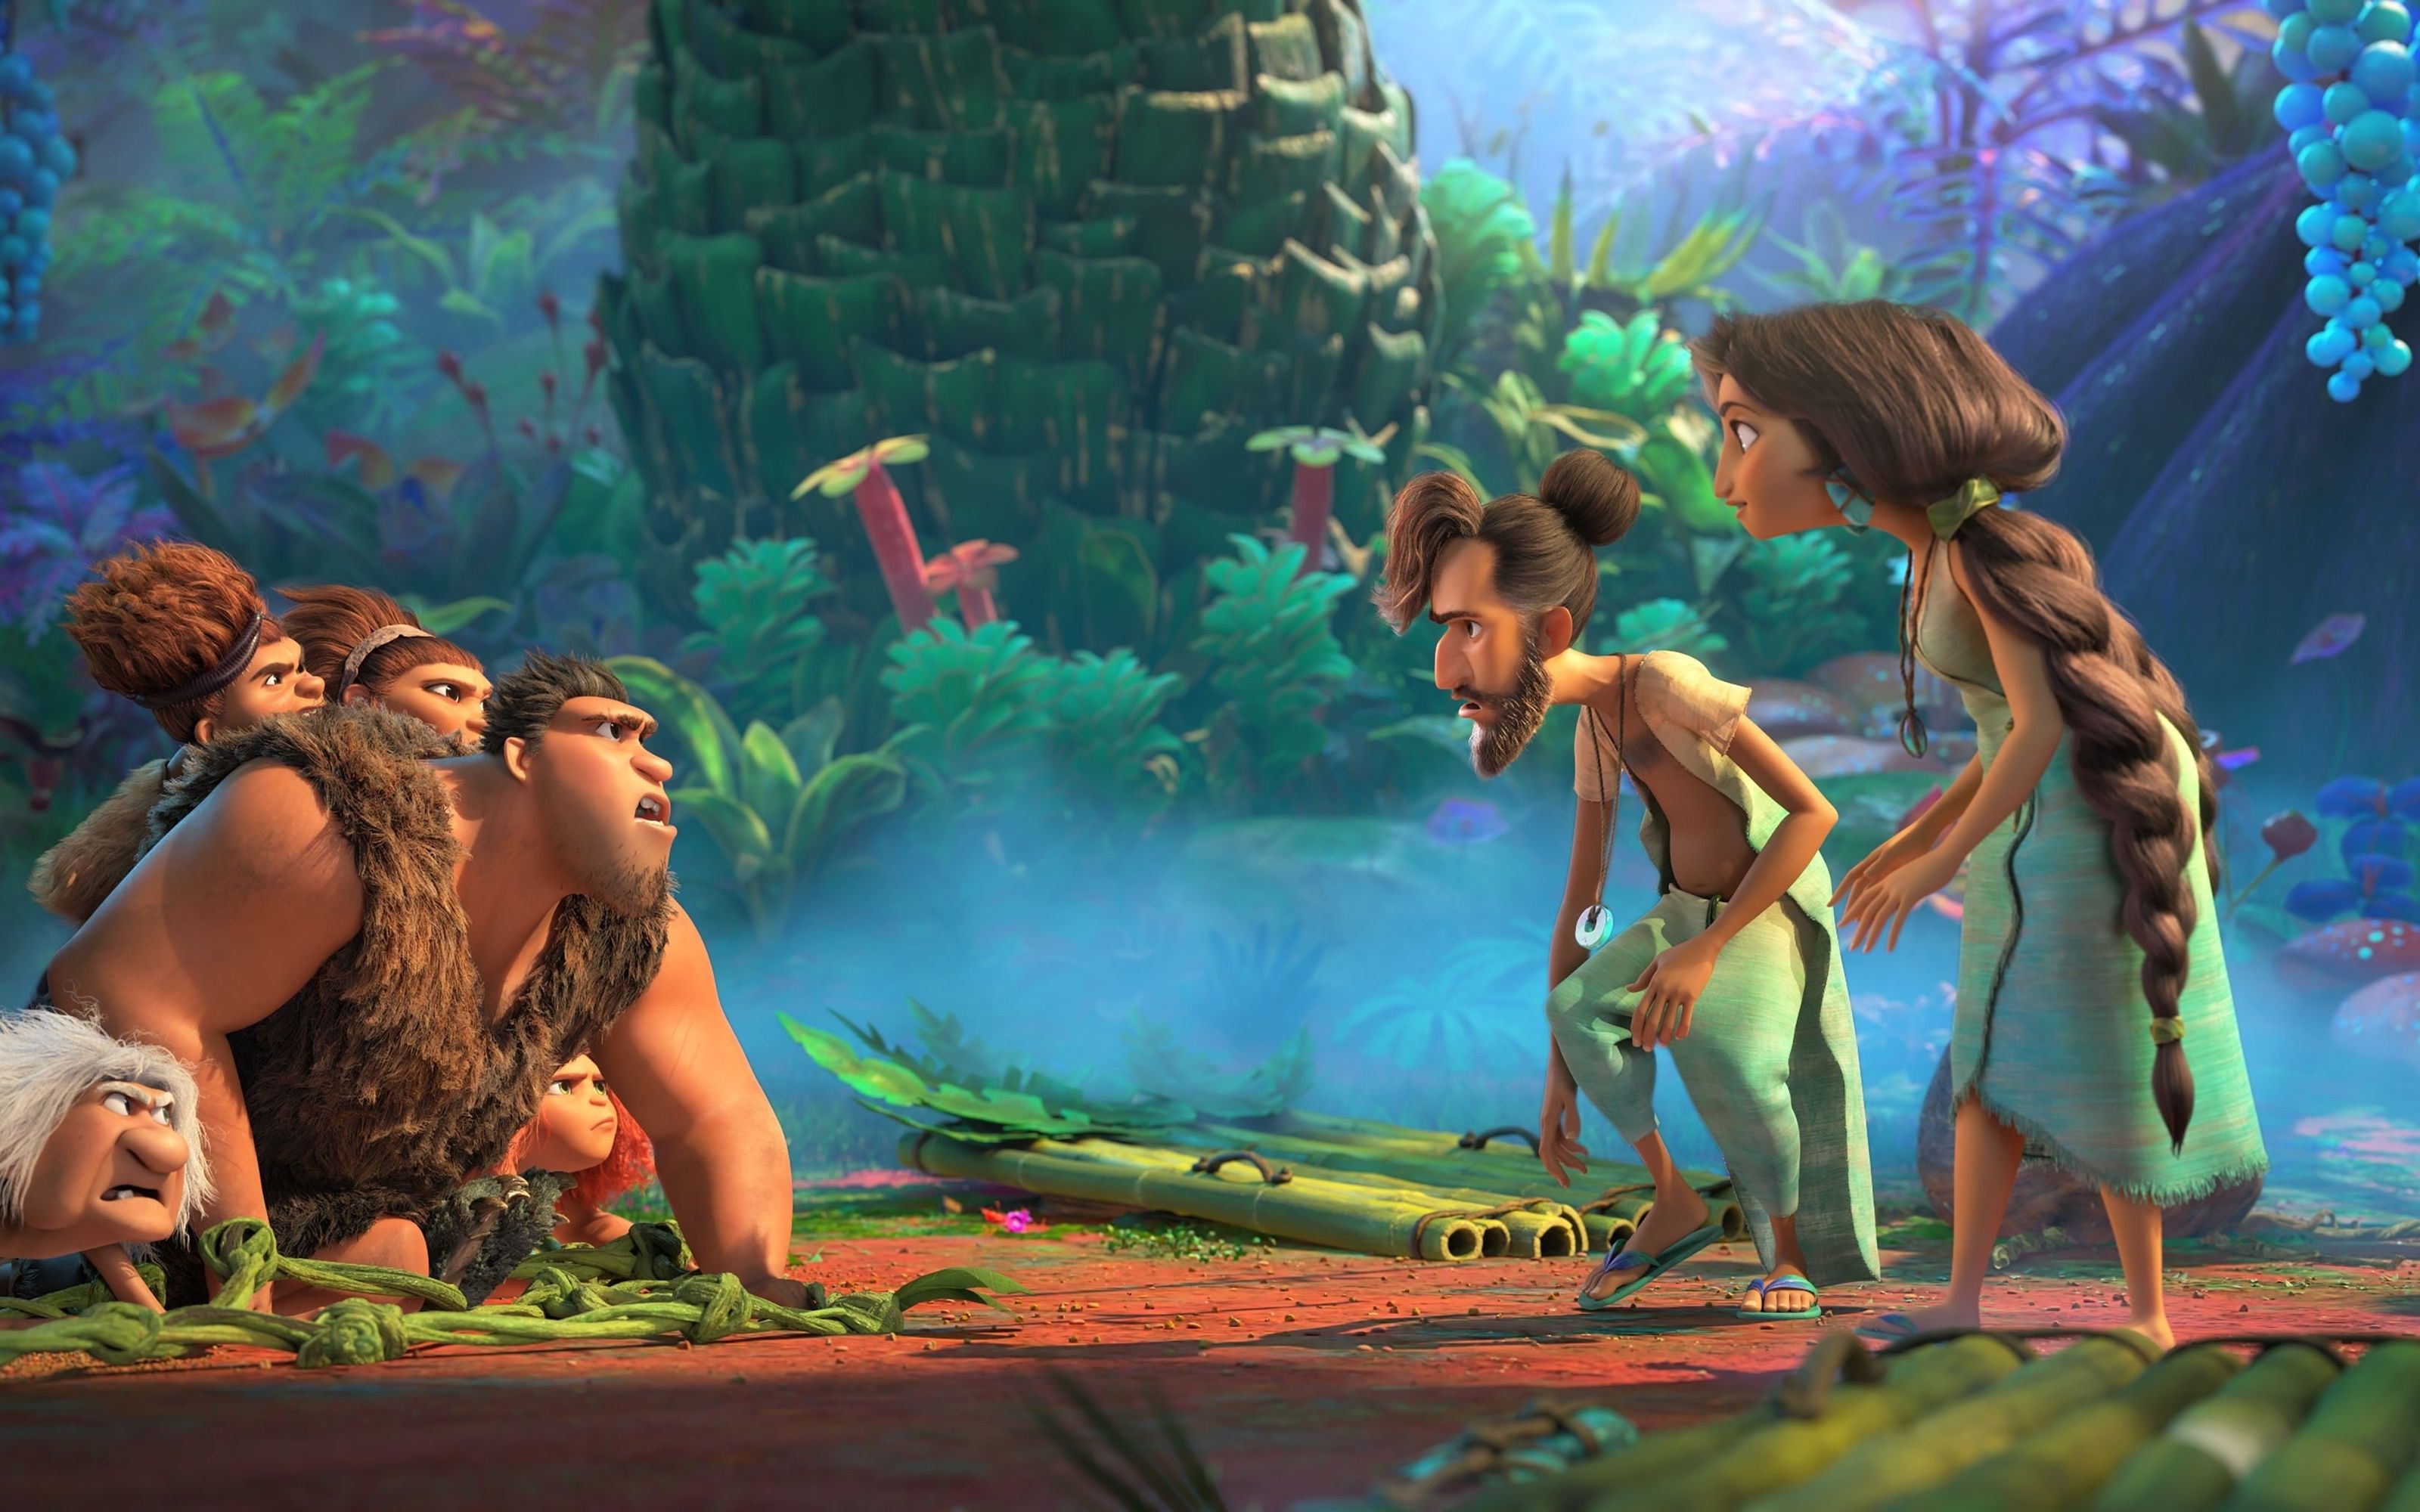 The Croods A New Age Wallpaper, HD Movies 4K Wallpaper, Image, Photo and Background